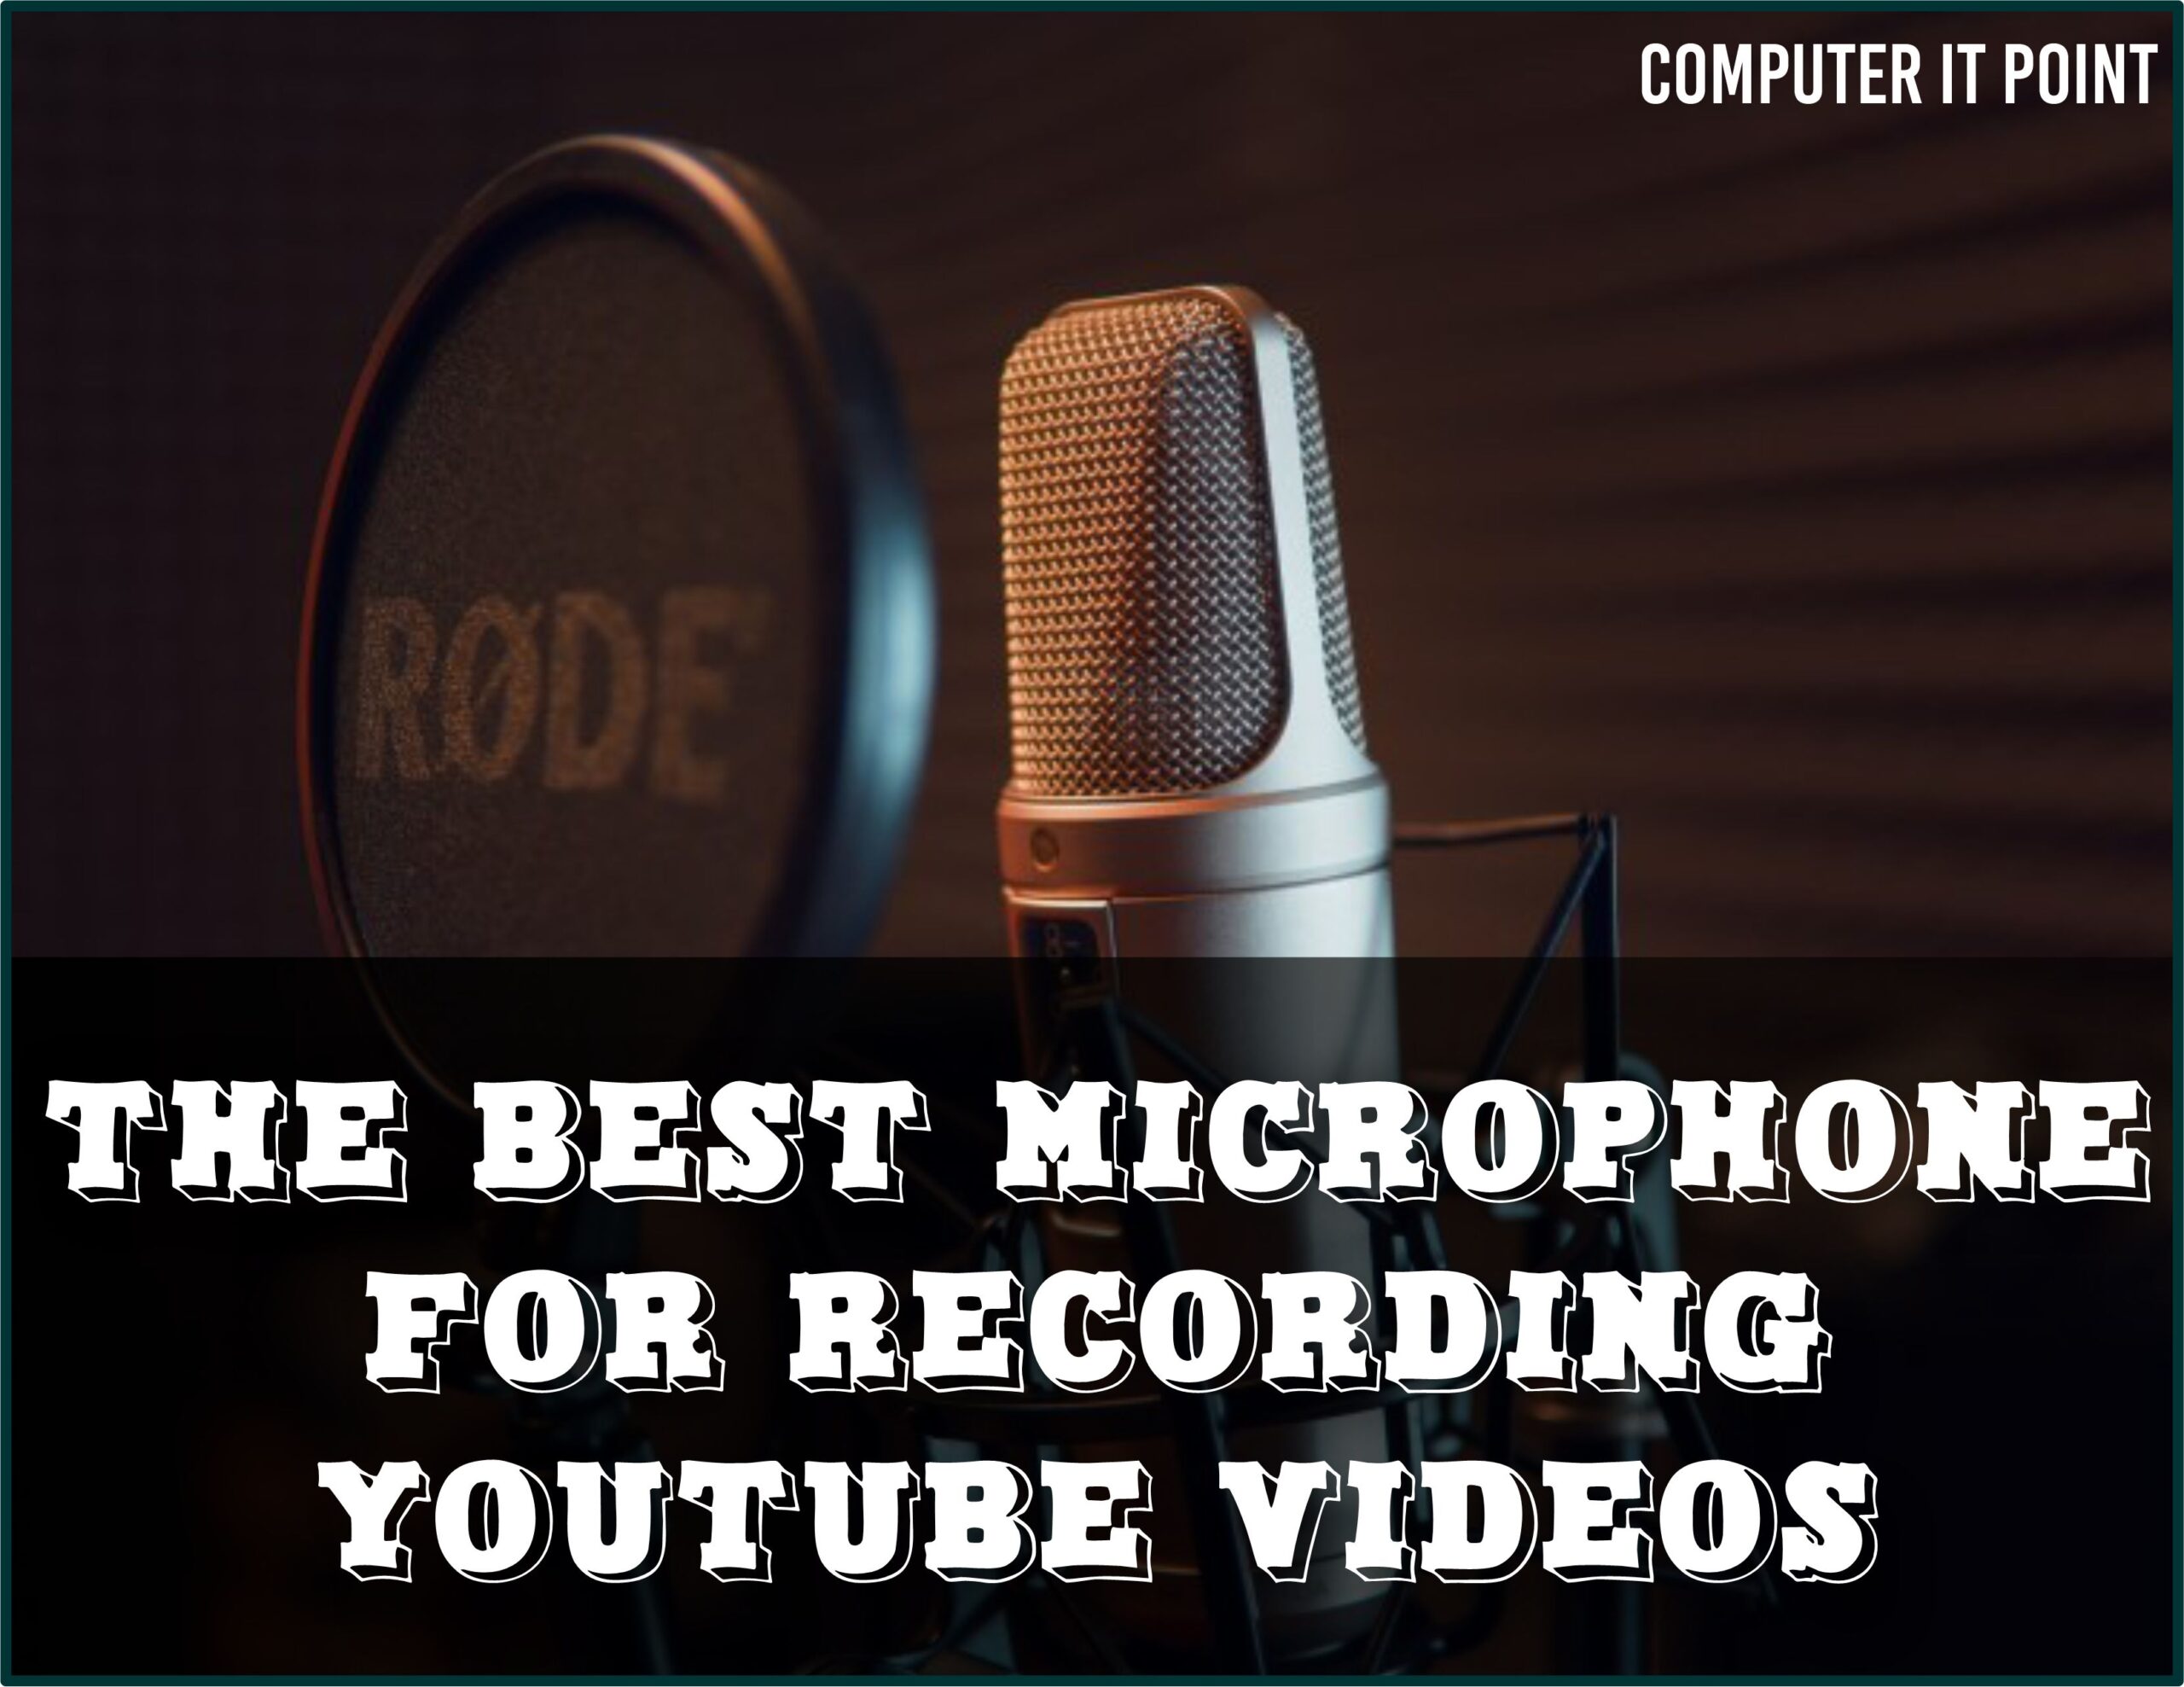 The Best Microphone for Recording YouTube Videos